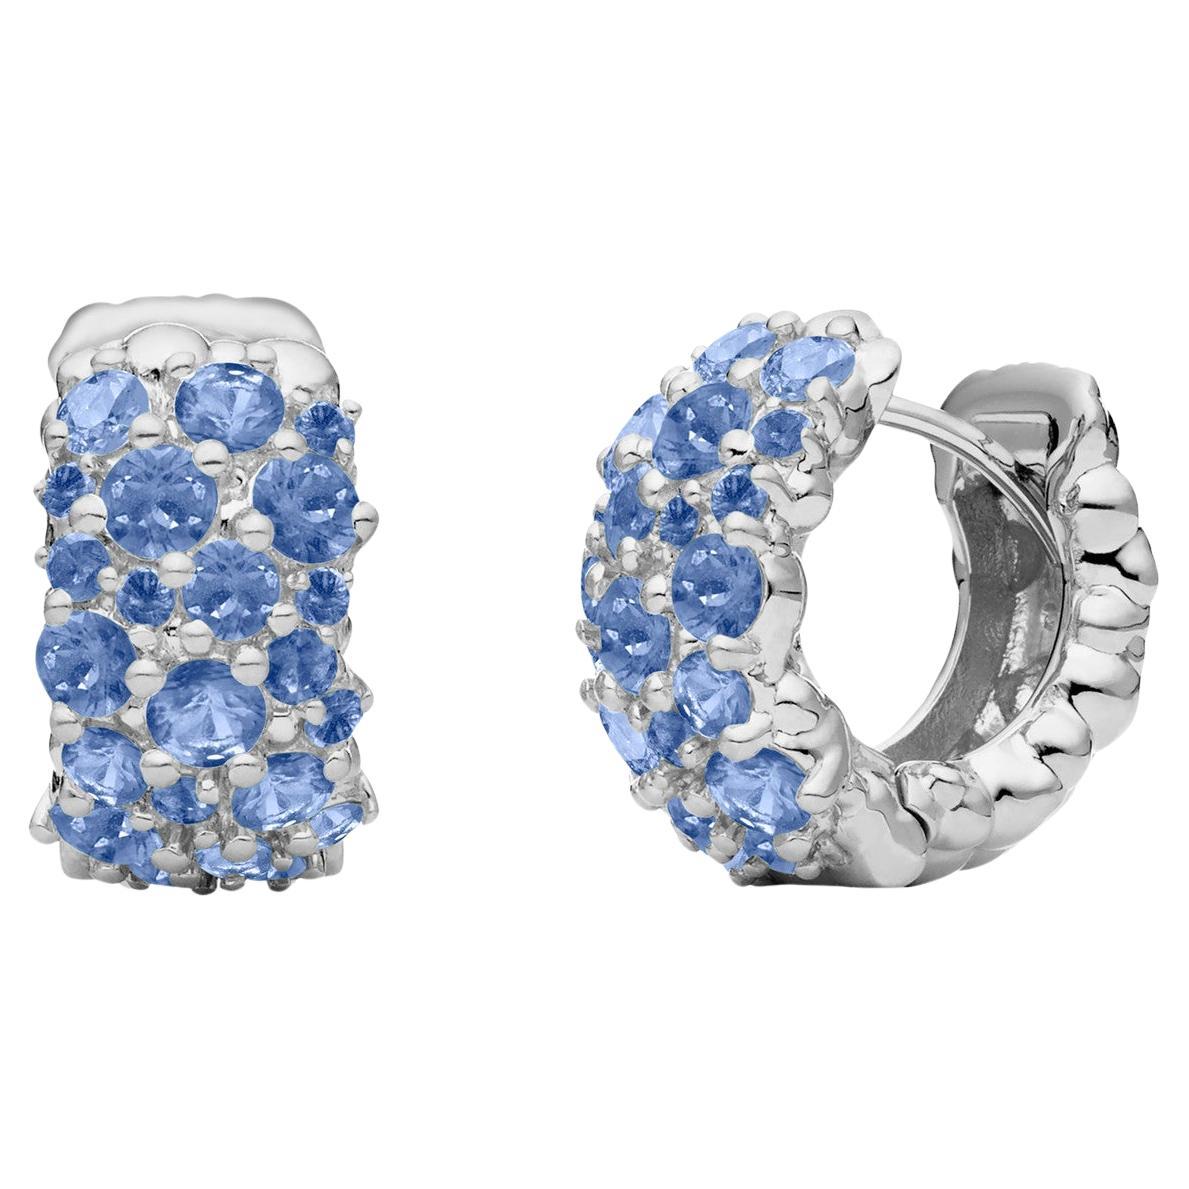 Paul Morelli 18K White Gold Small Confetti Snap Hoop Earrings with Blue Sapphire For Sale